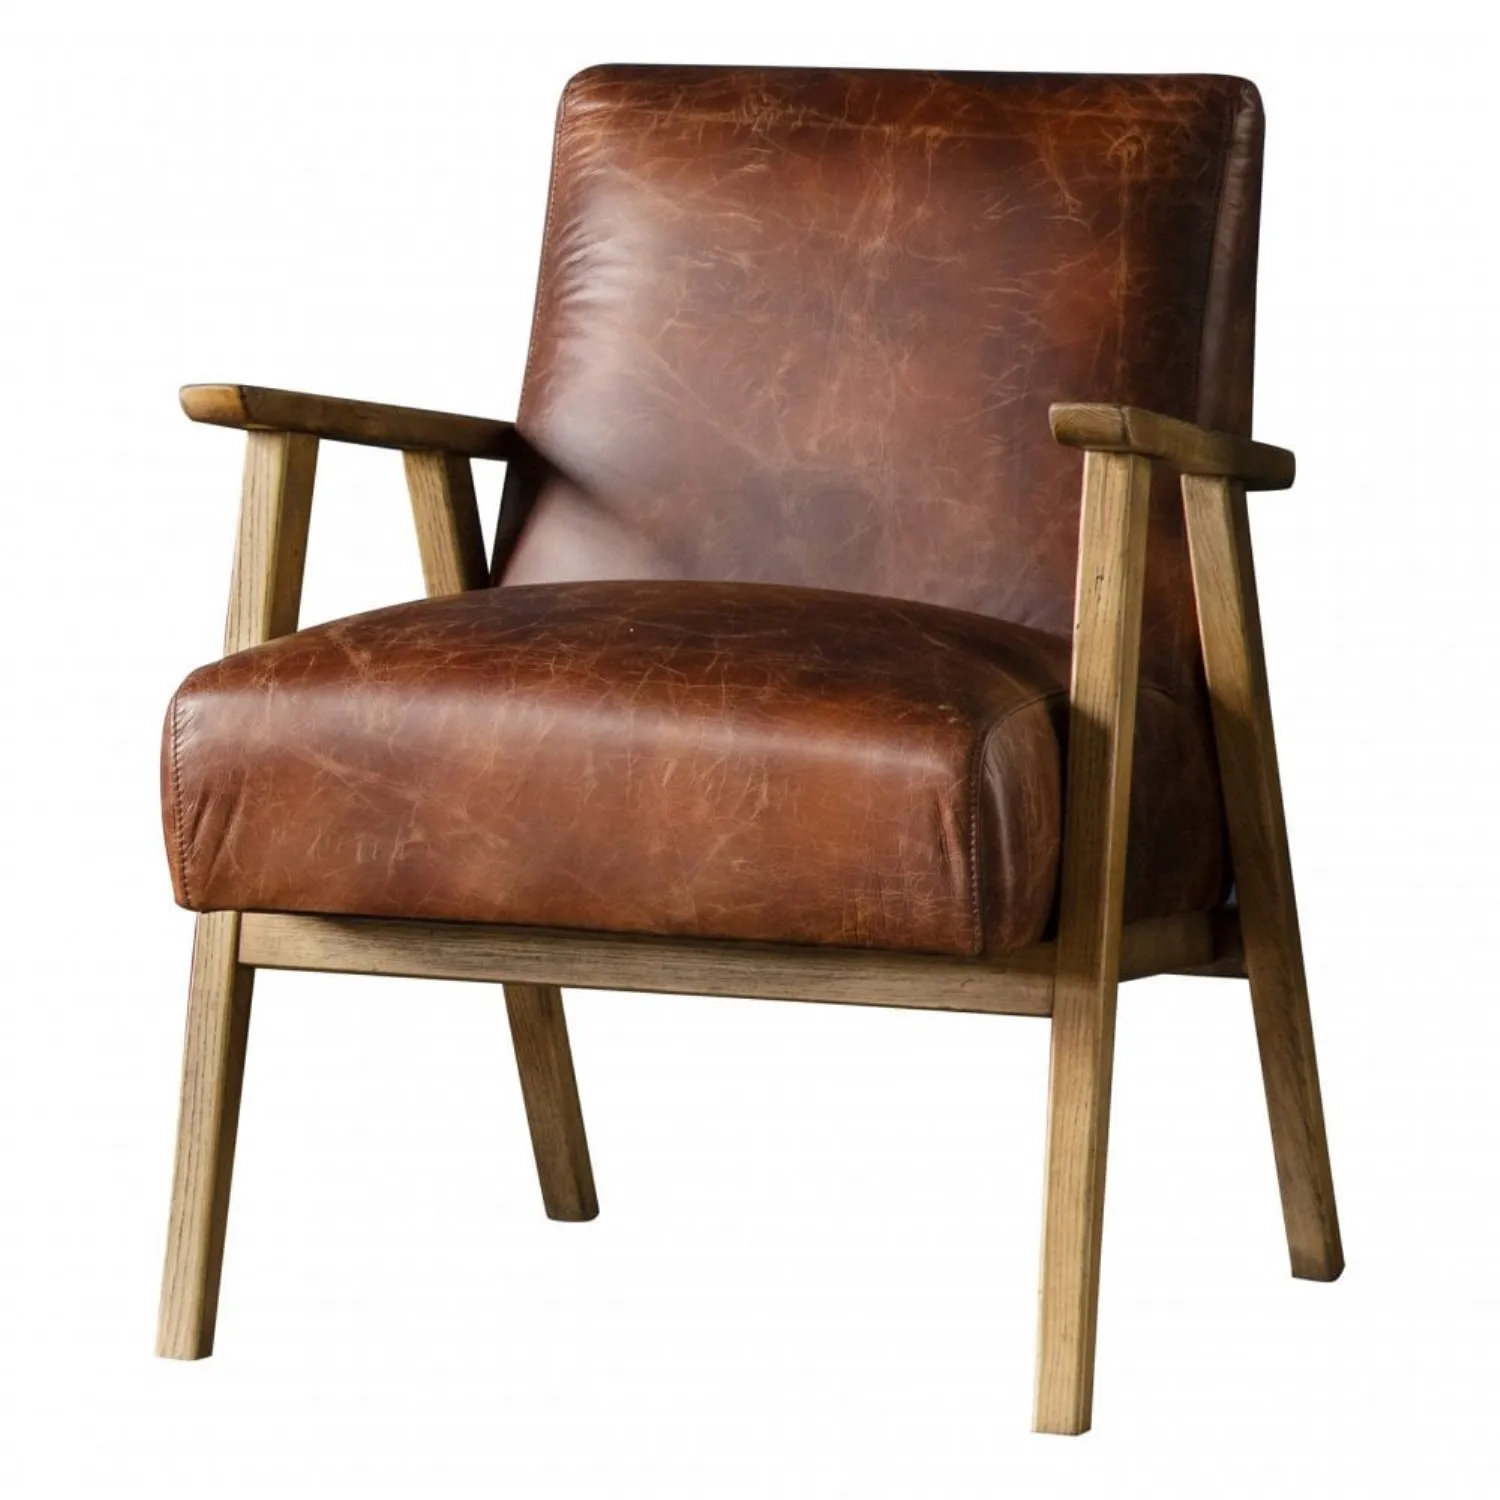 Vintage Tan Brown Leather Armchair with Oak Legs and Arms